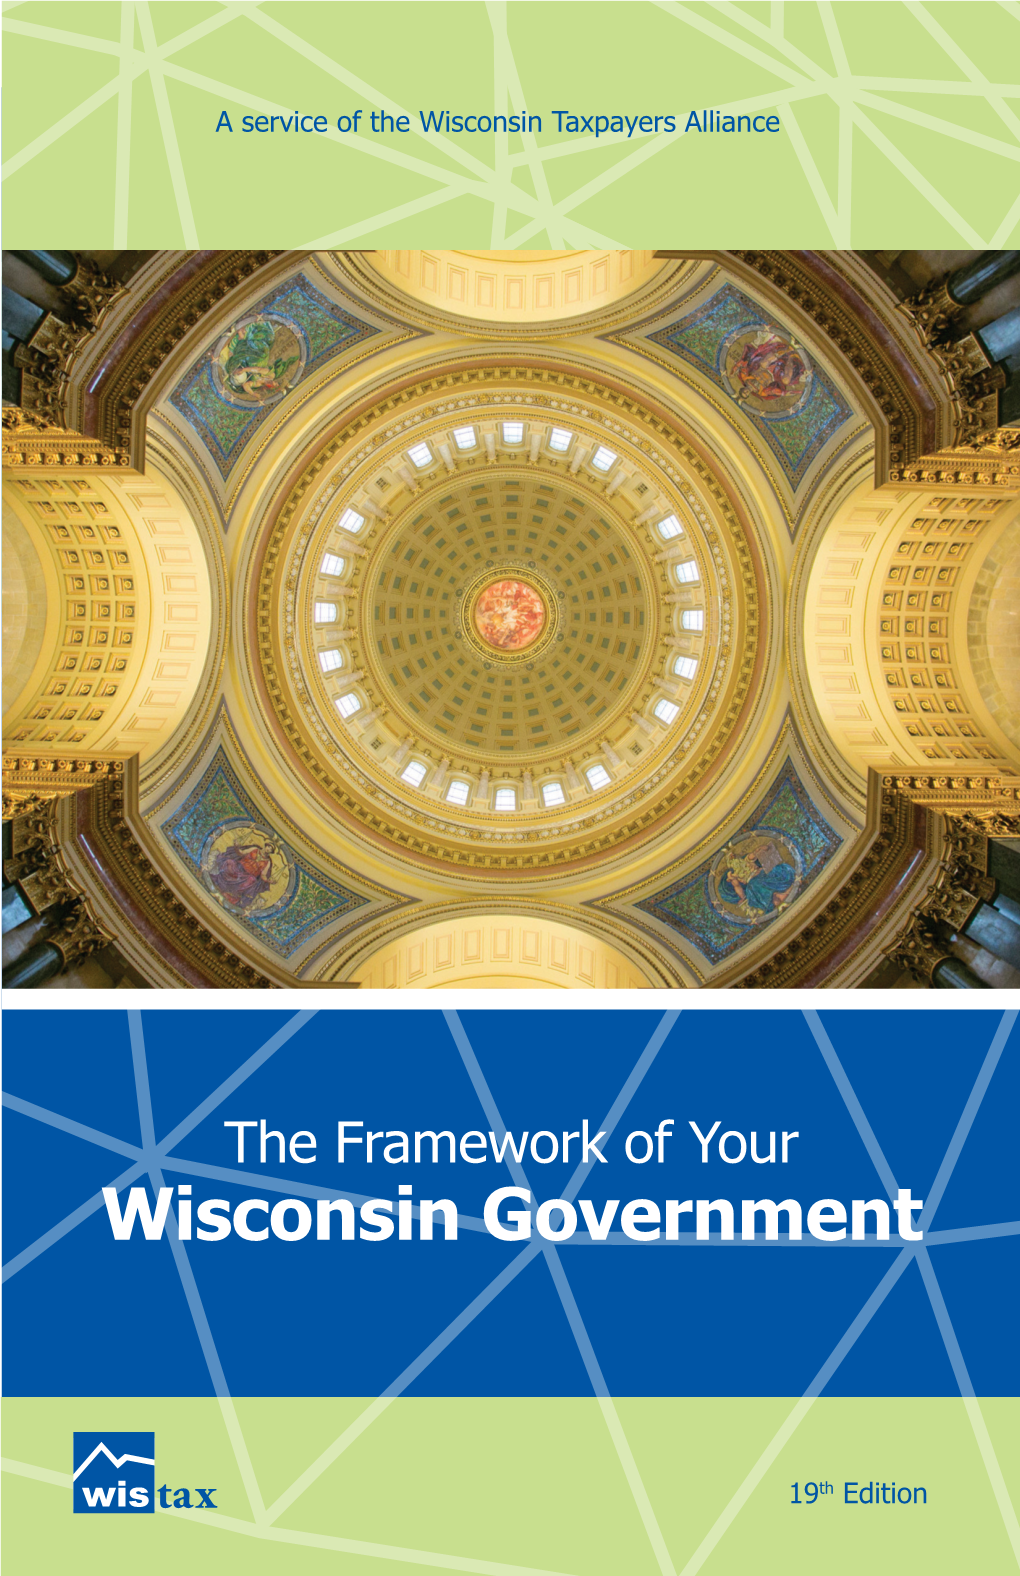 The Framework of Your Wisconsin Government